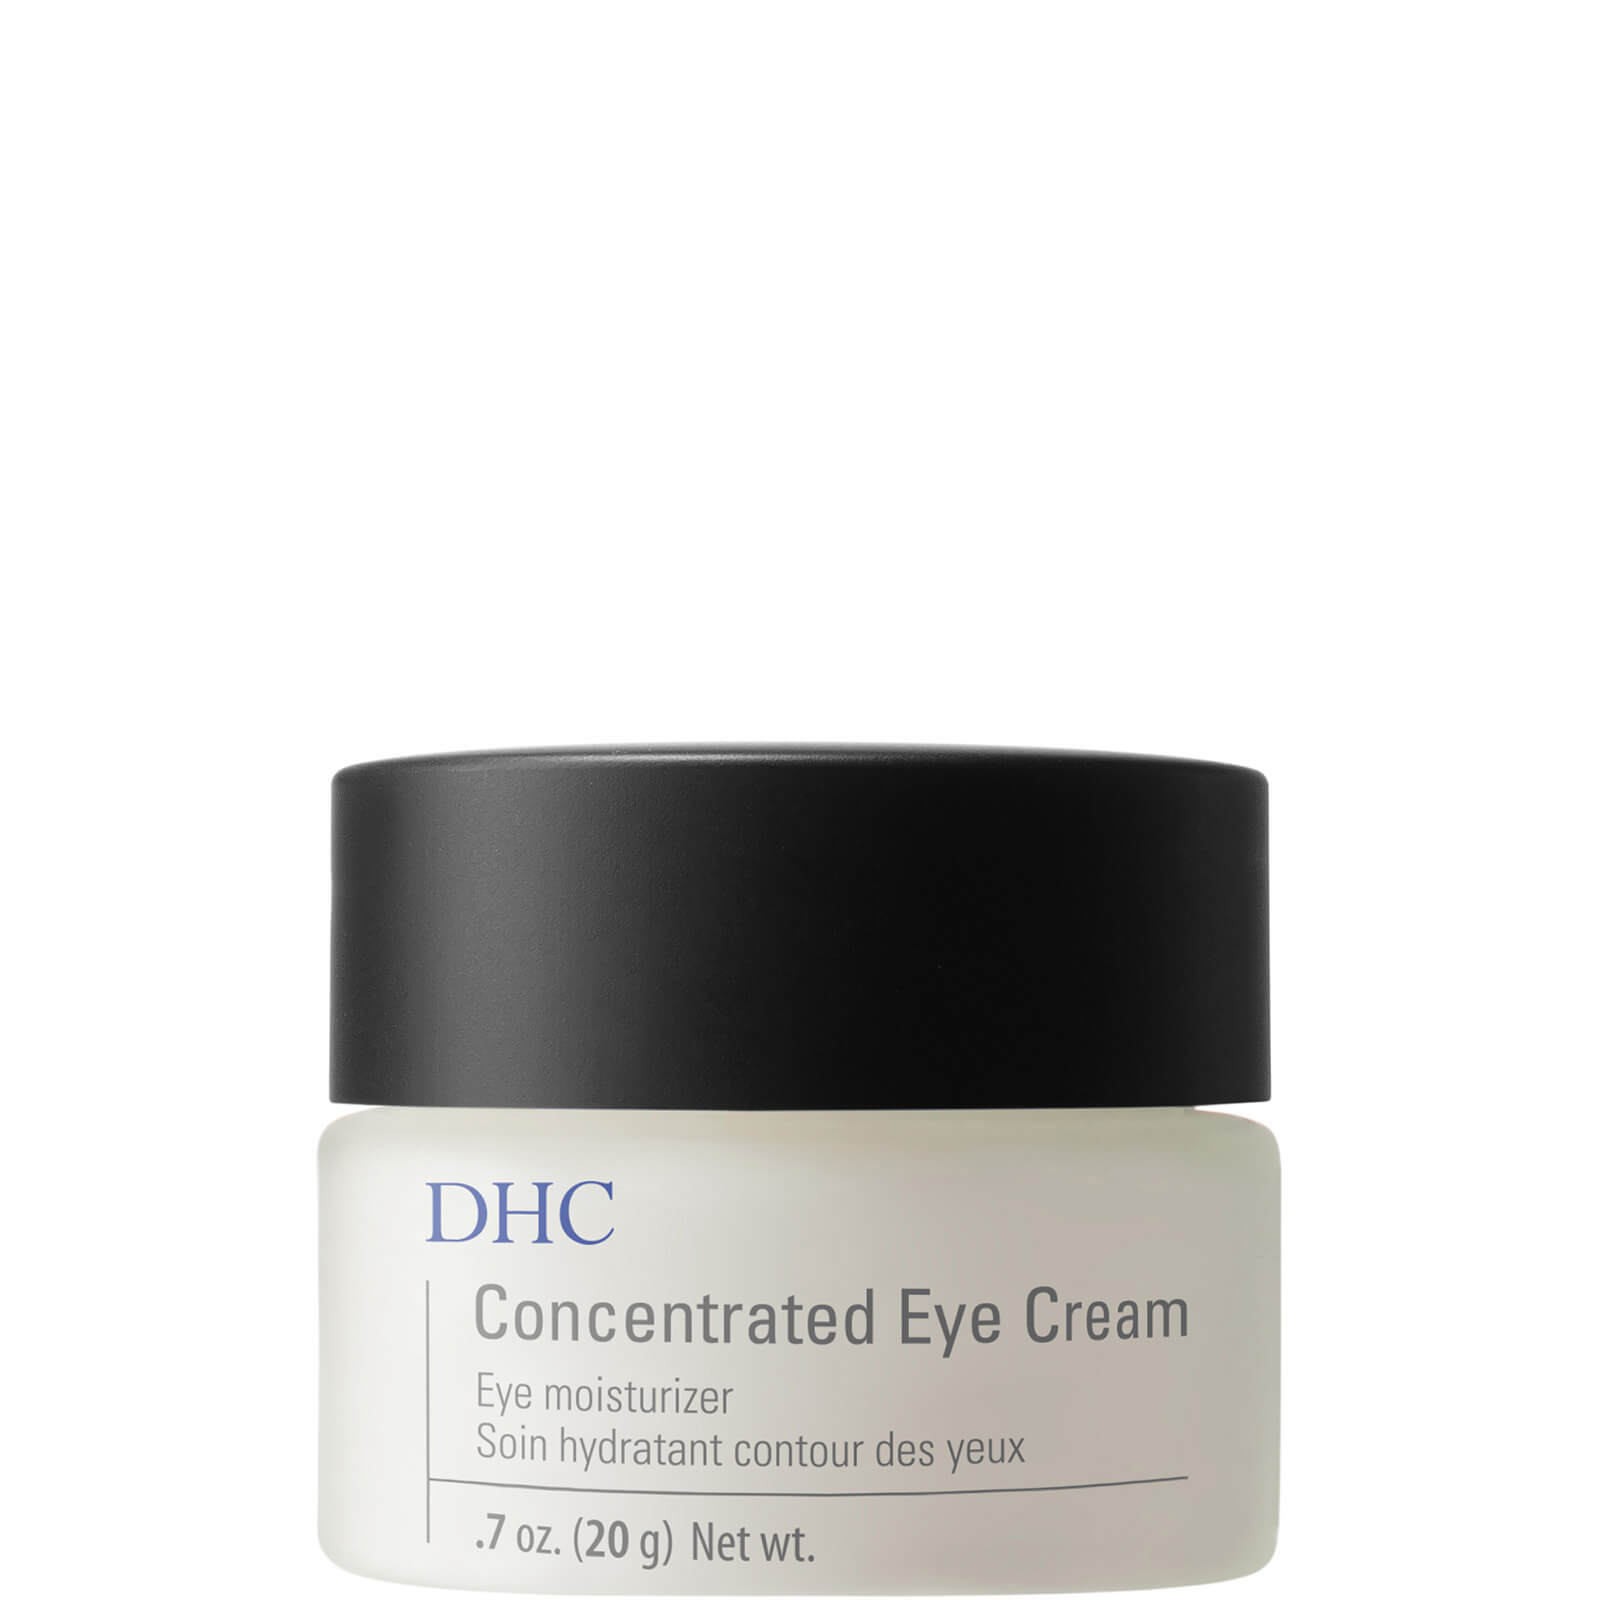 Photos - Cream / Lotion DHC Concentrated Eye Cream  MEC(20g)